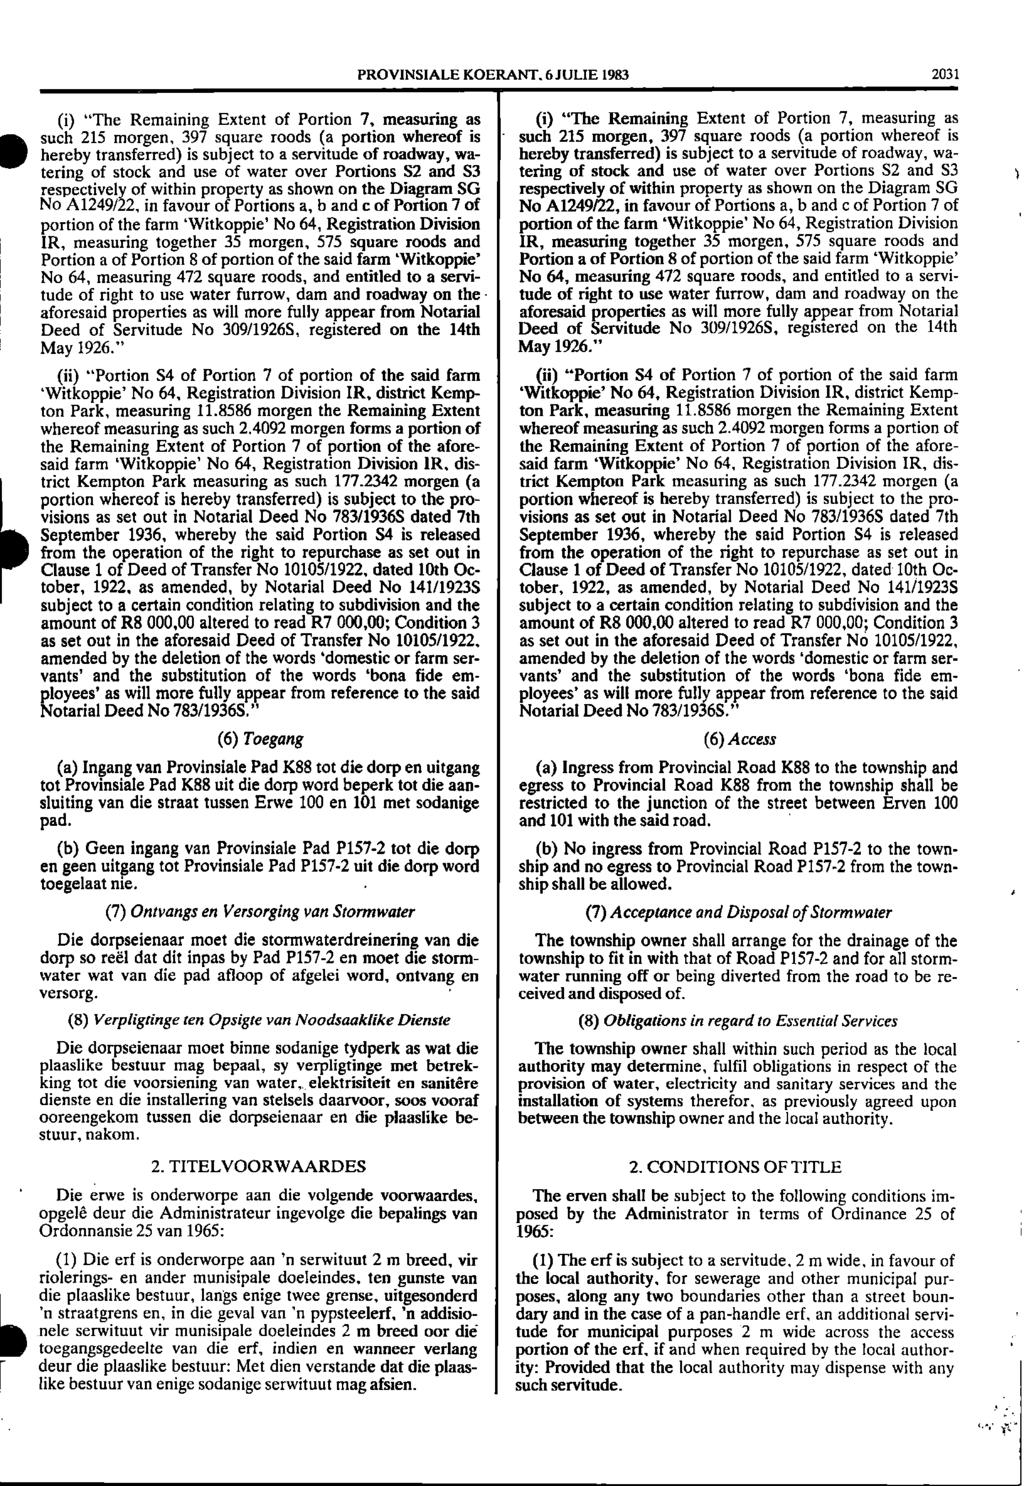 PROVINSIALE KOERANT 6 JULIE 1983 2031 such (i) "The Remaining Extent of Portion 7, measuring as (i) "The Remaining Extent of Portion 7, measuring as 215 morgen, 397 square roods (a portion whereof is